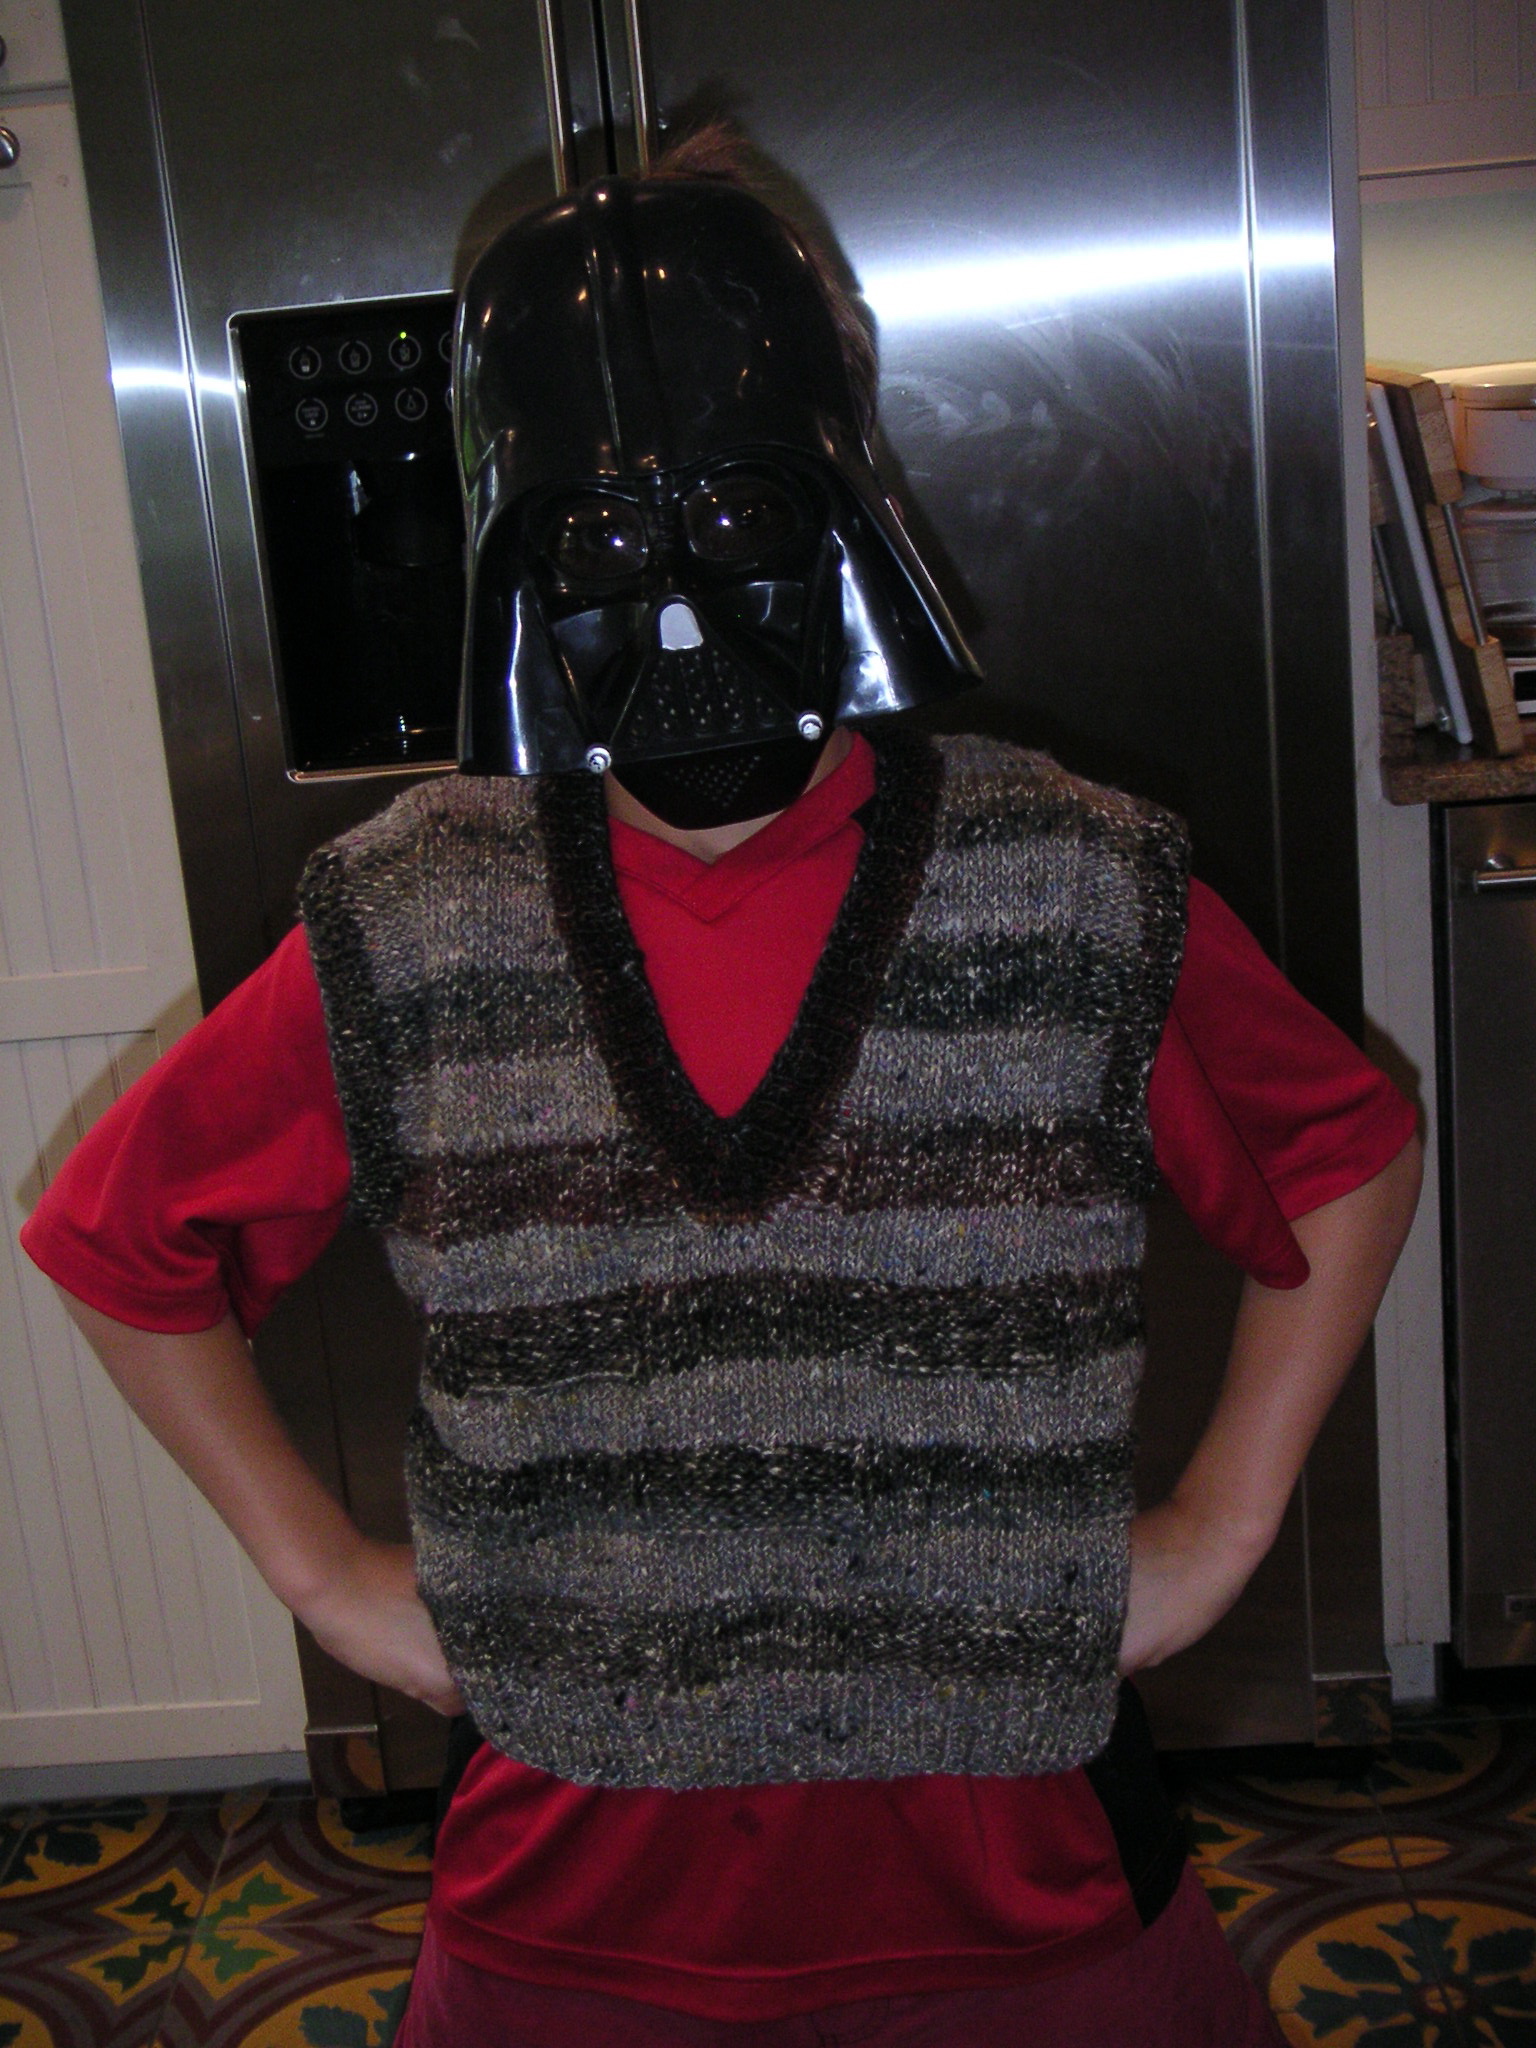 darth vader costume that is next to a refrigerator